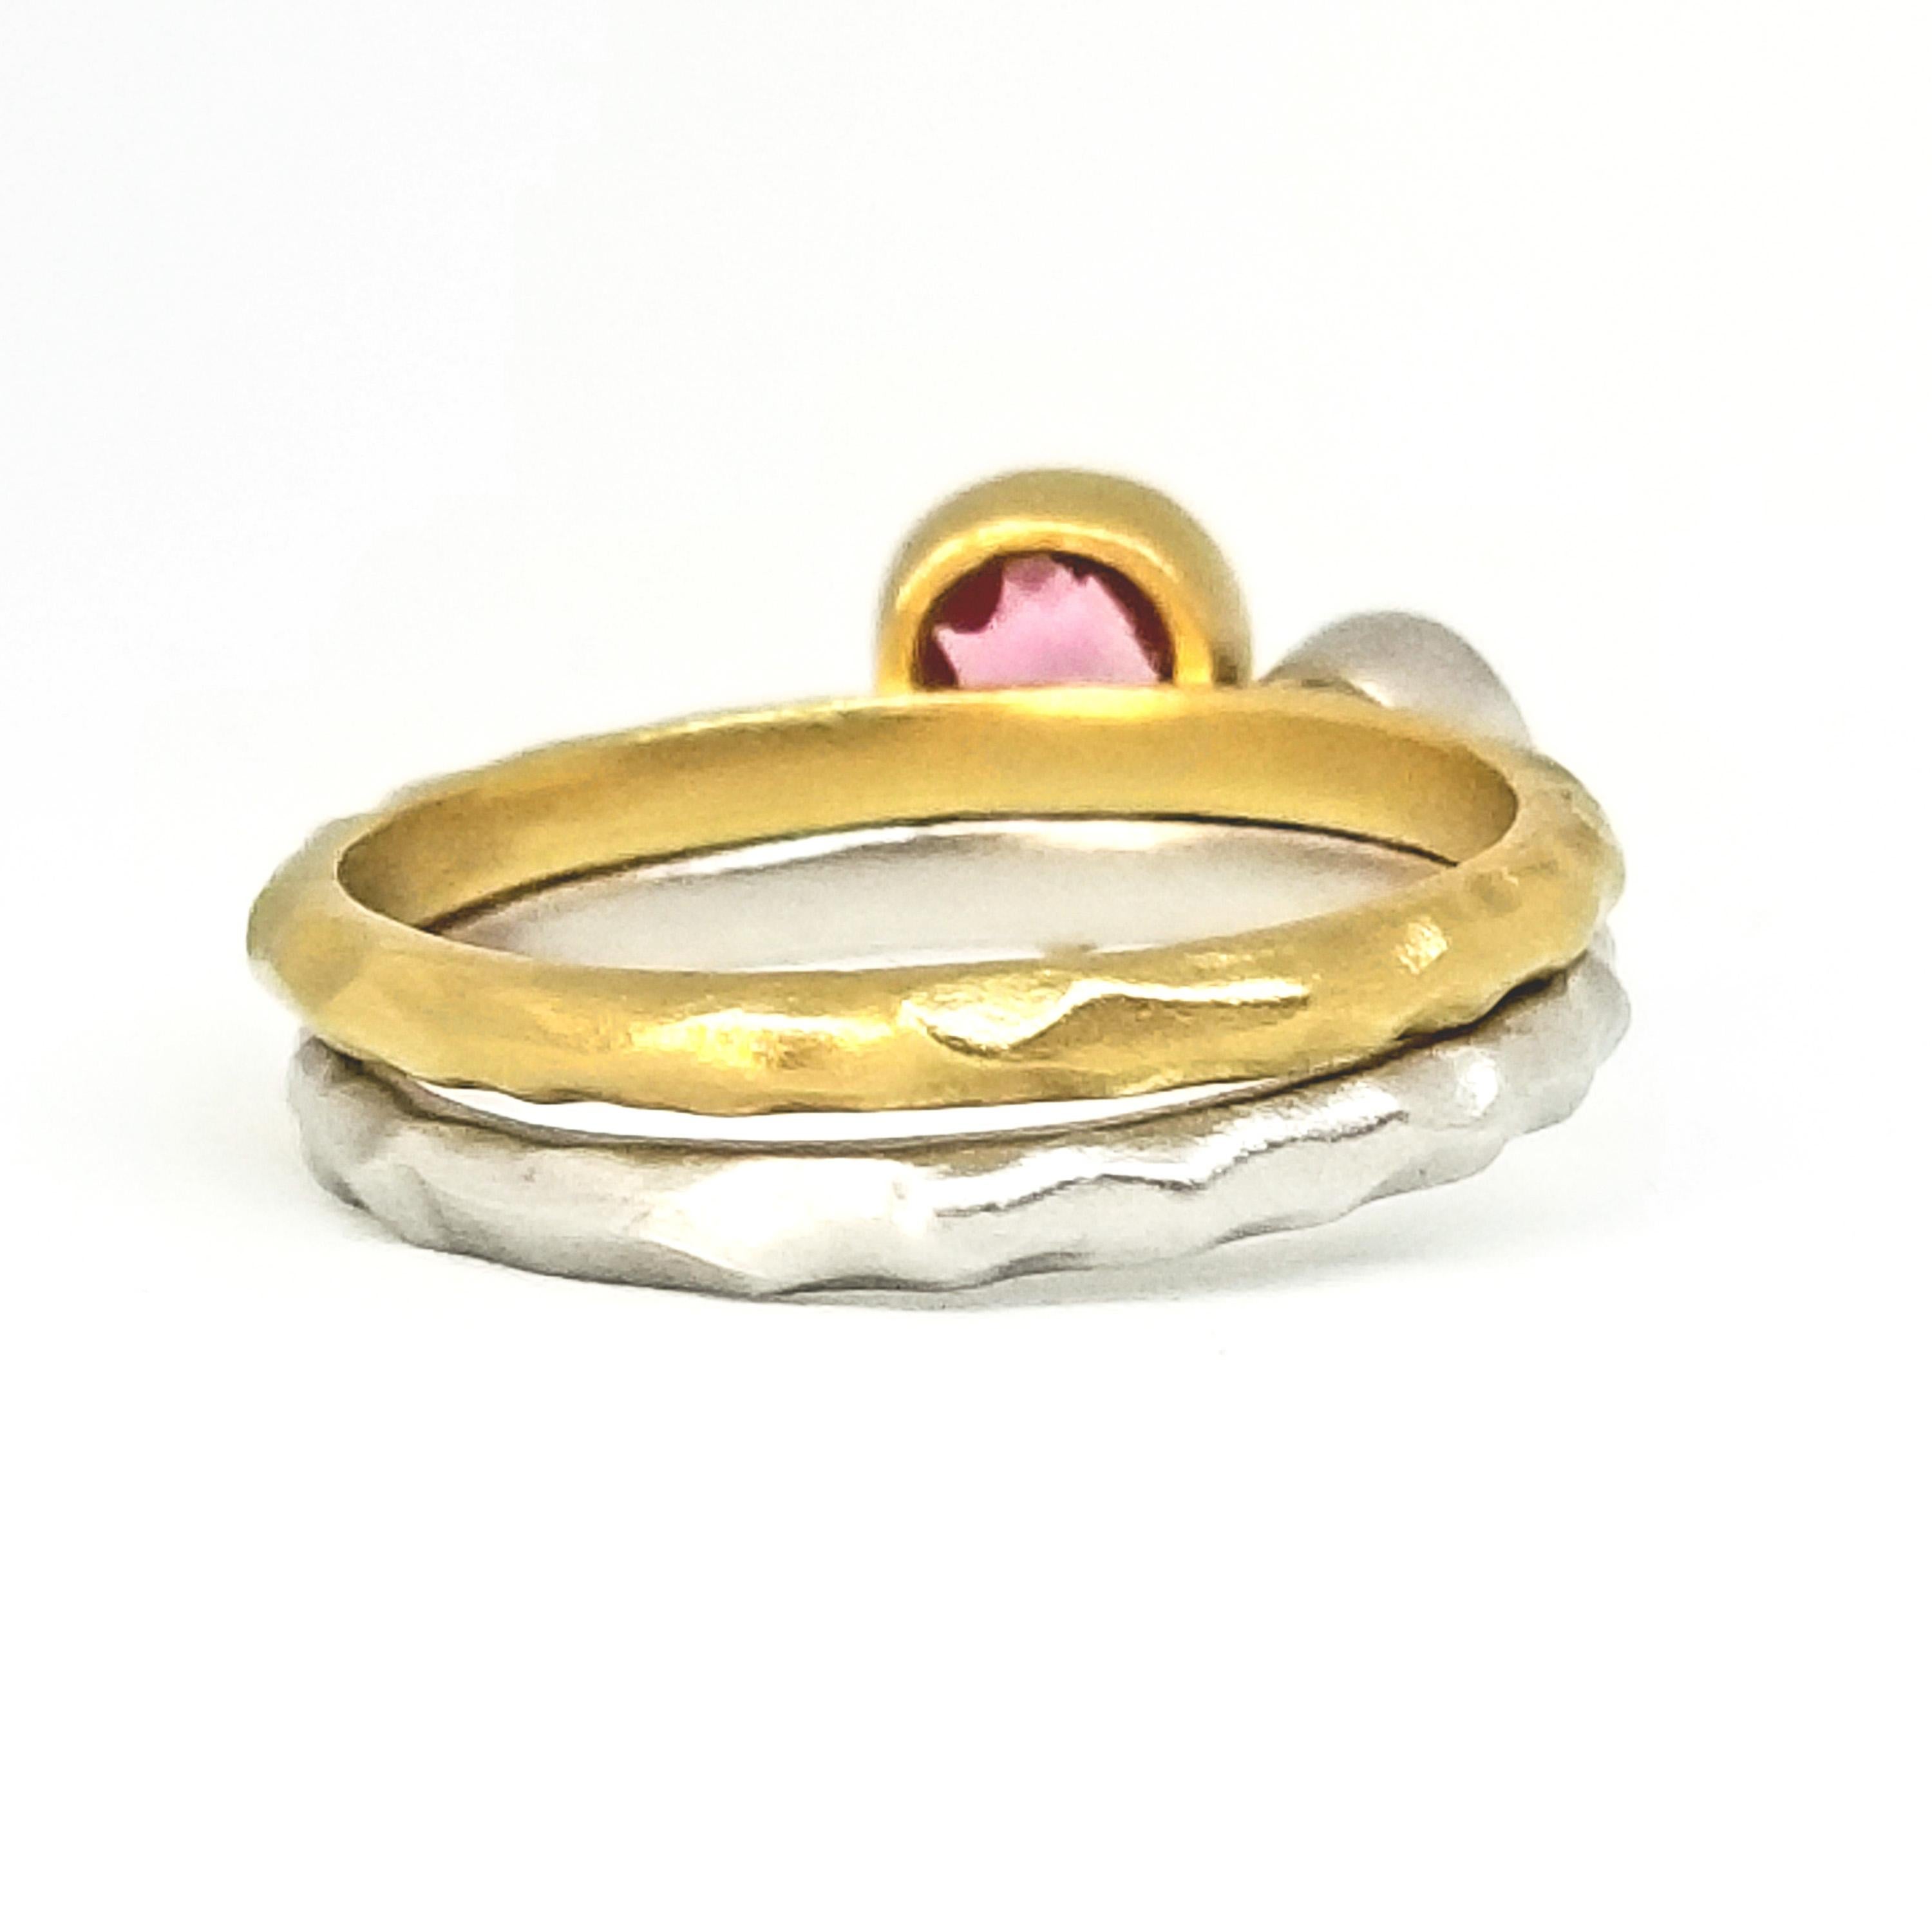 Contemporary Stacking Rings Bezel Set of 2 Blue Sapphire Pink Tourmaline Hammered Matte Gold 